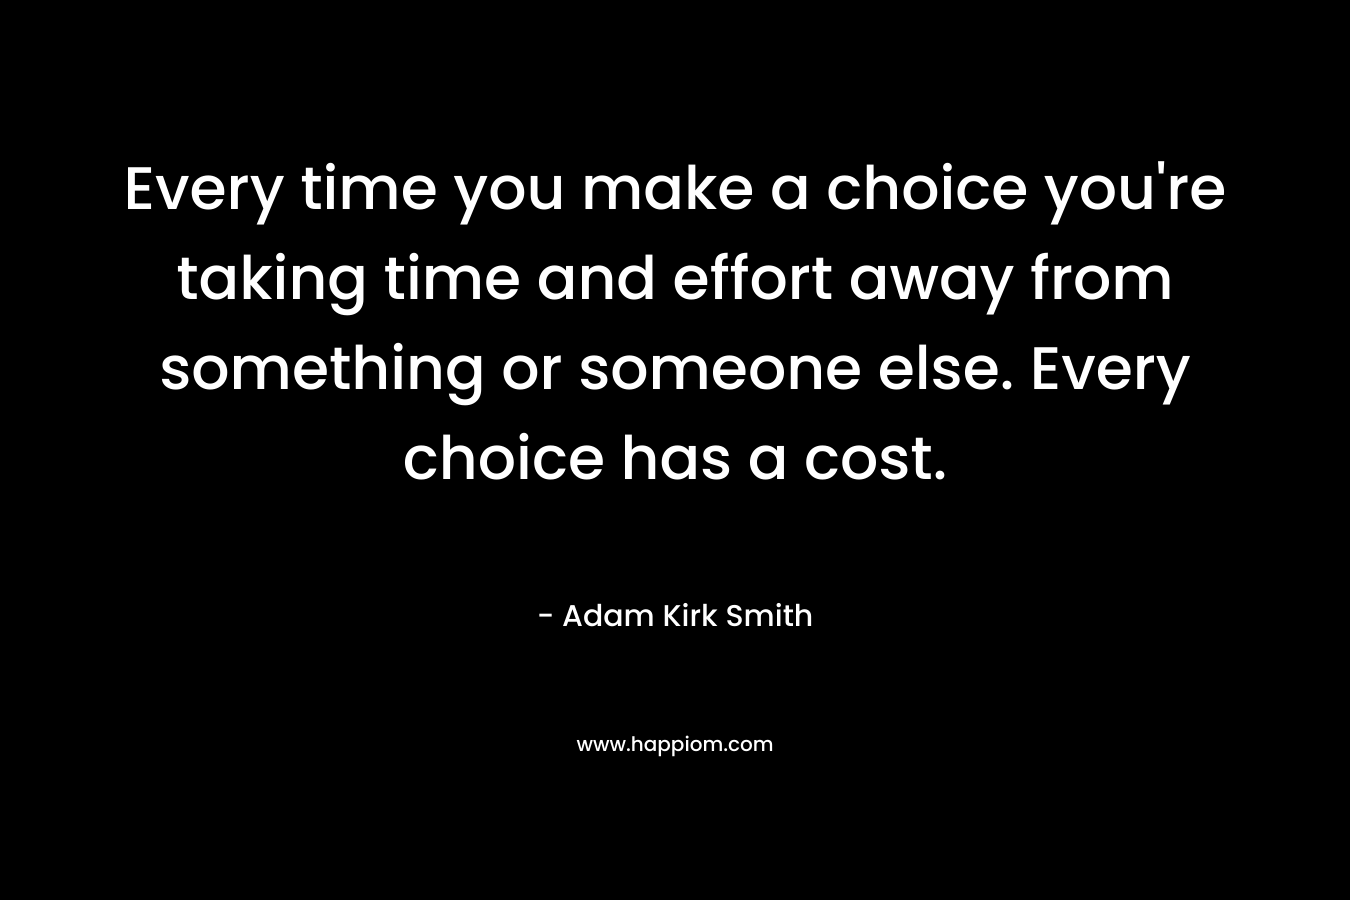 Every time you make a choice you're taking time and effort away from something or someone else. Every choice has a cost.